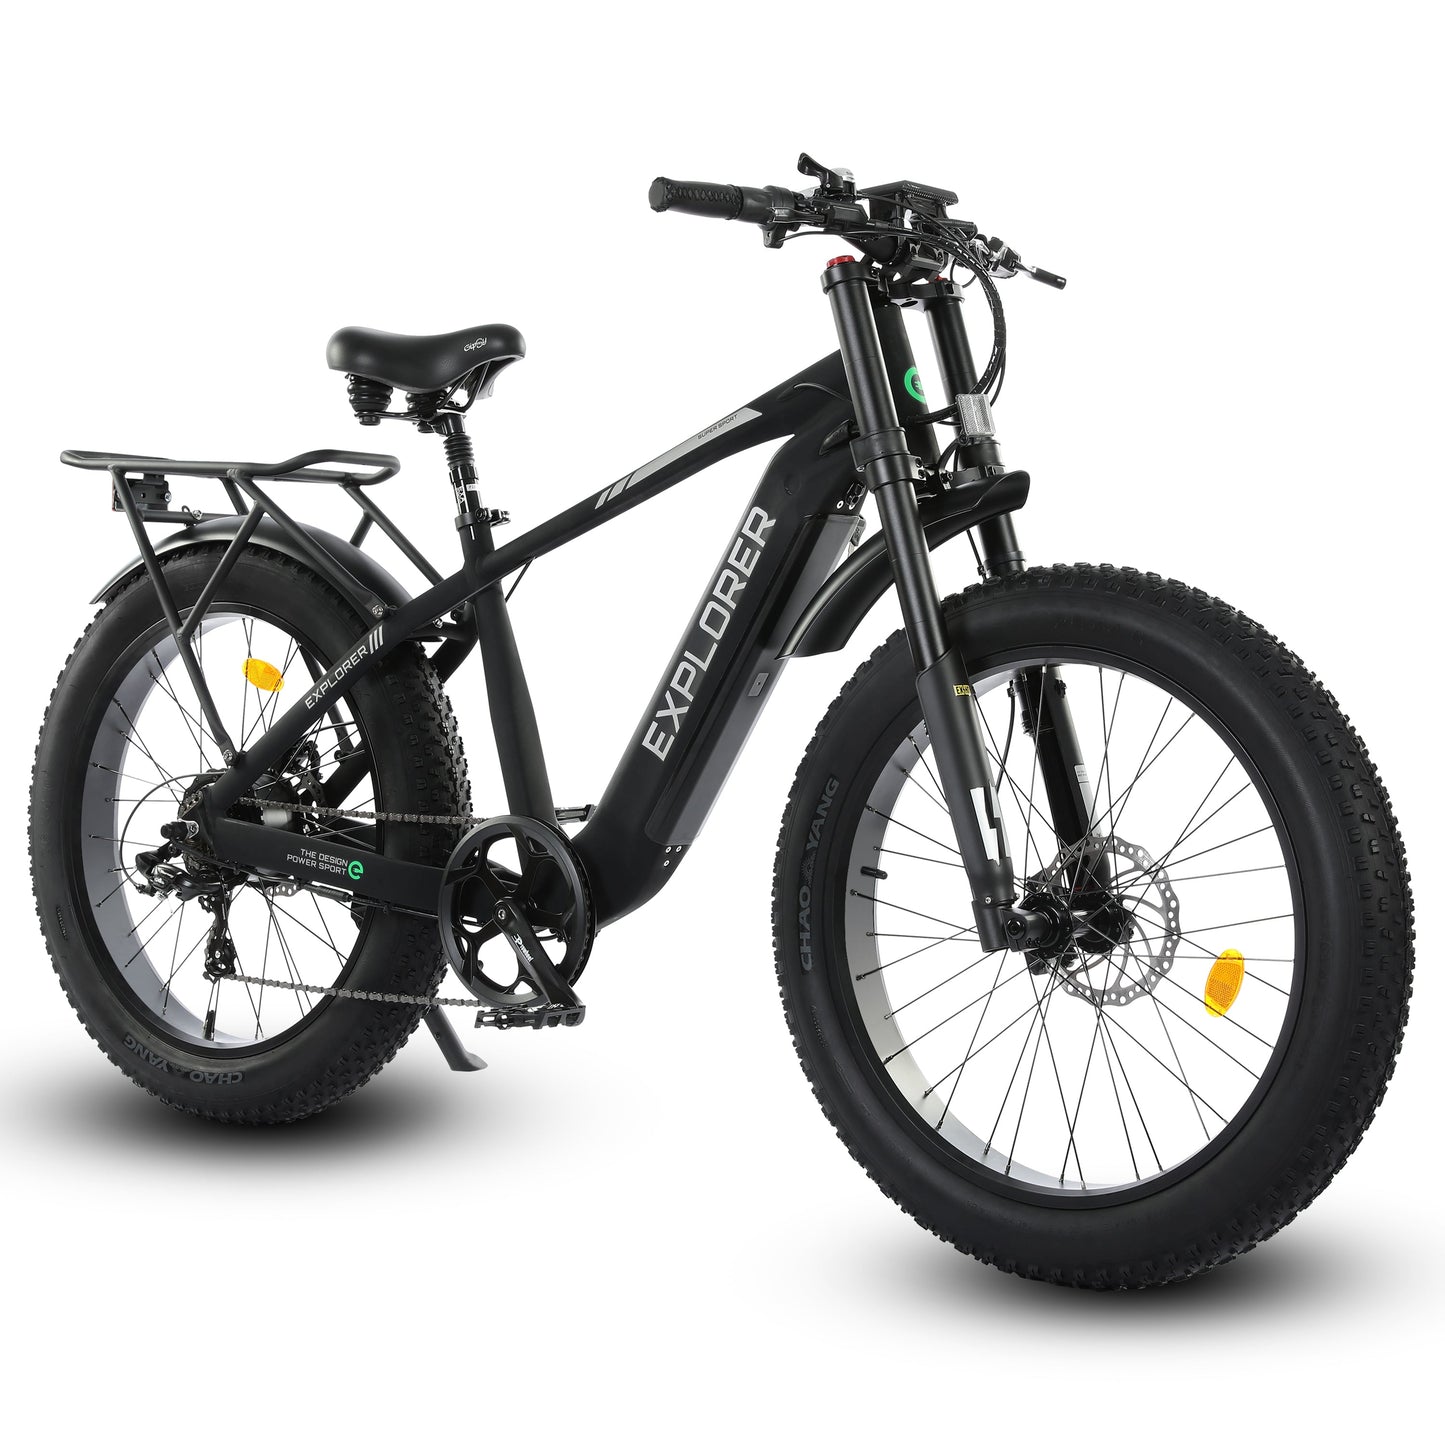 Ecotric Explorer All Terrain Anti-Skid Fat Tire For Comfort Off-Road Riding 750W Electric Bike